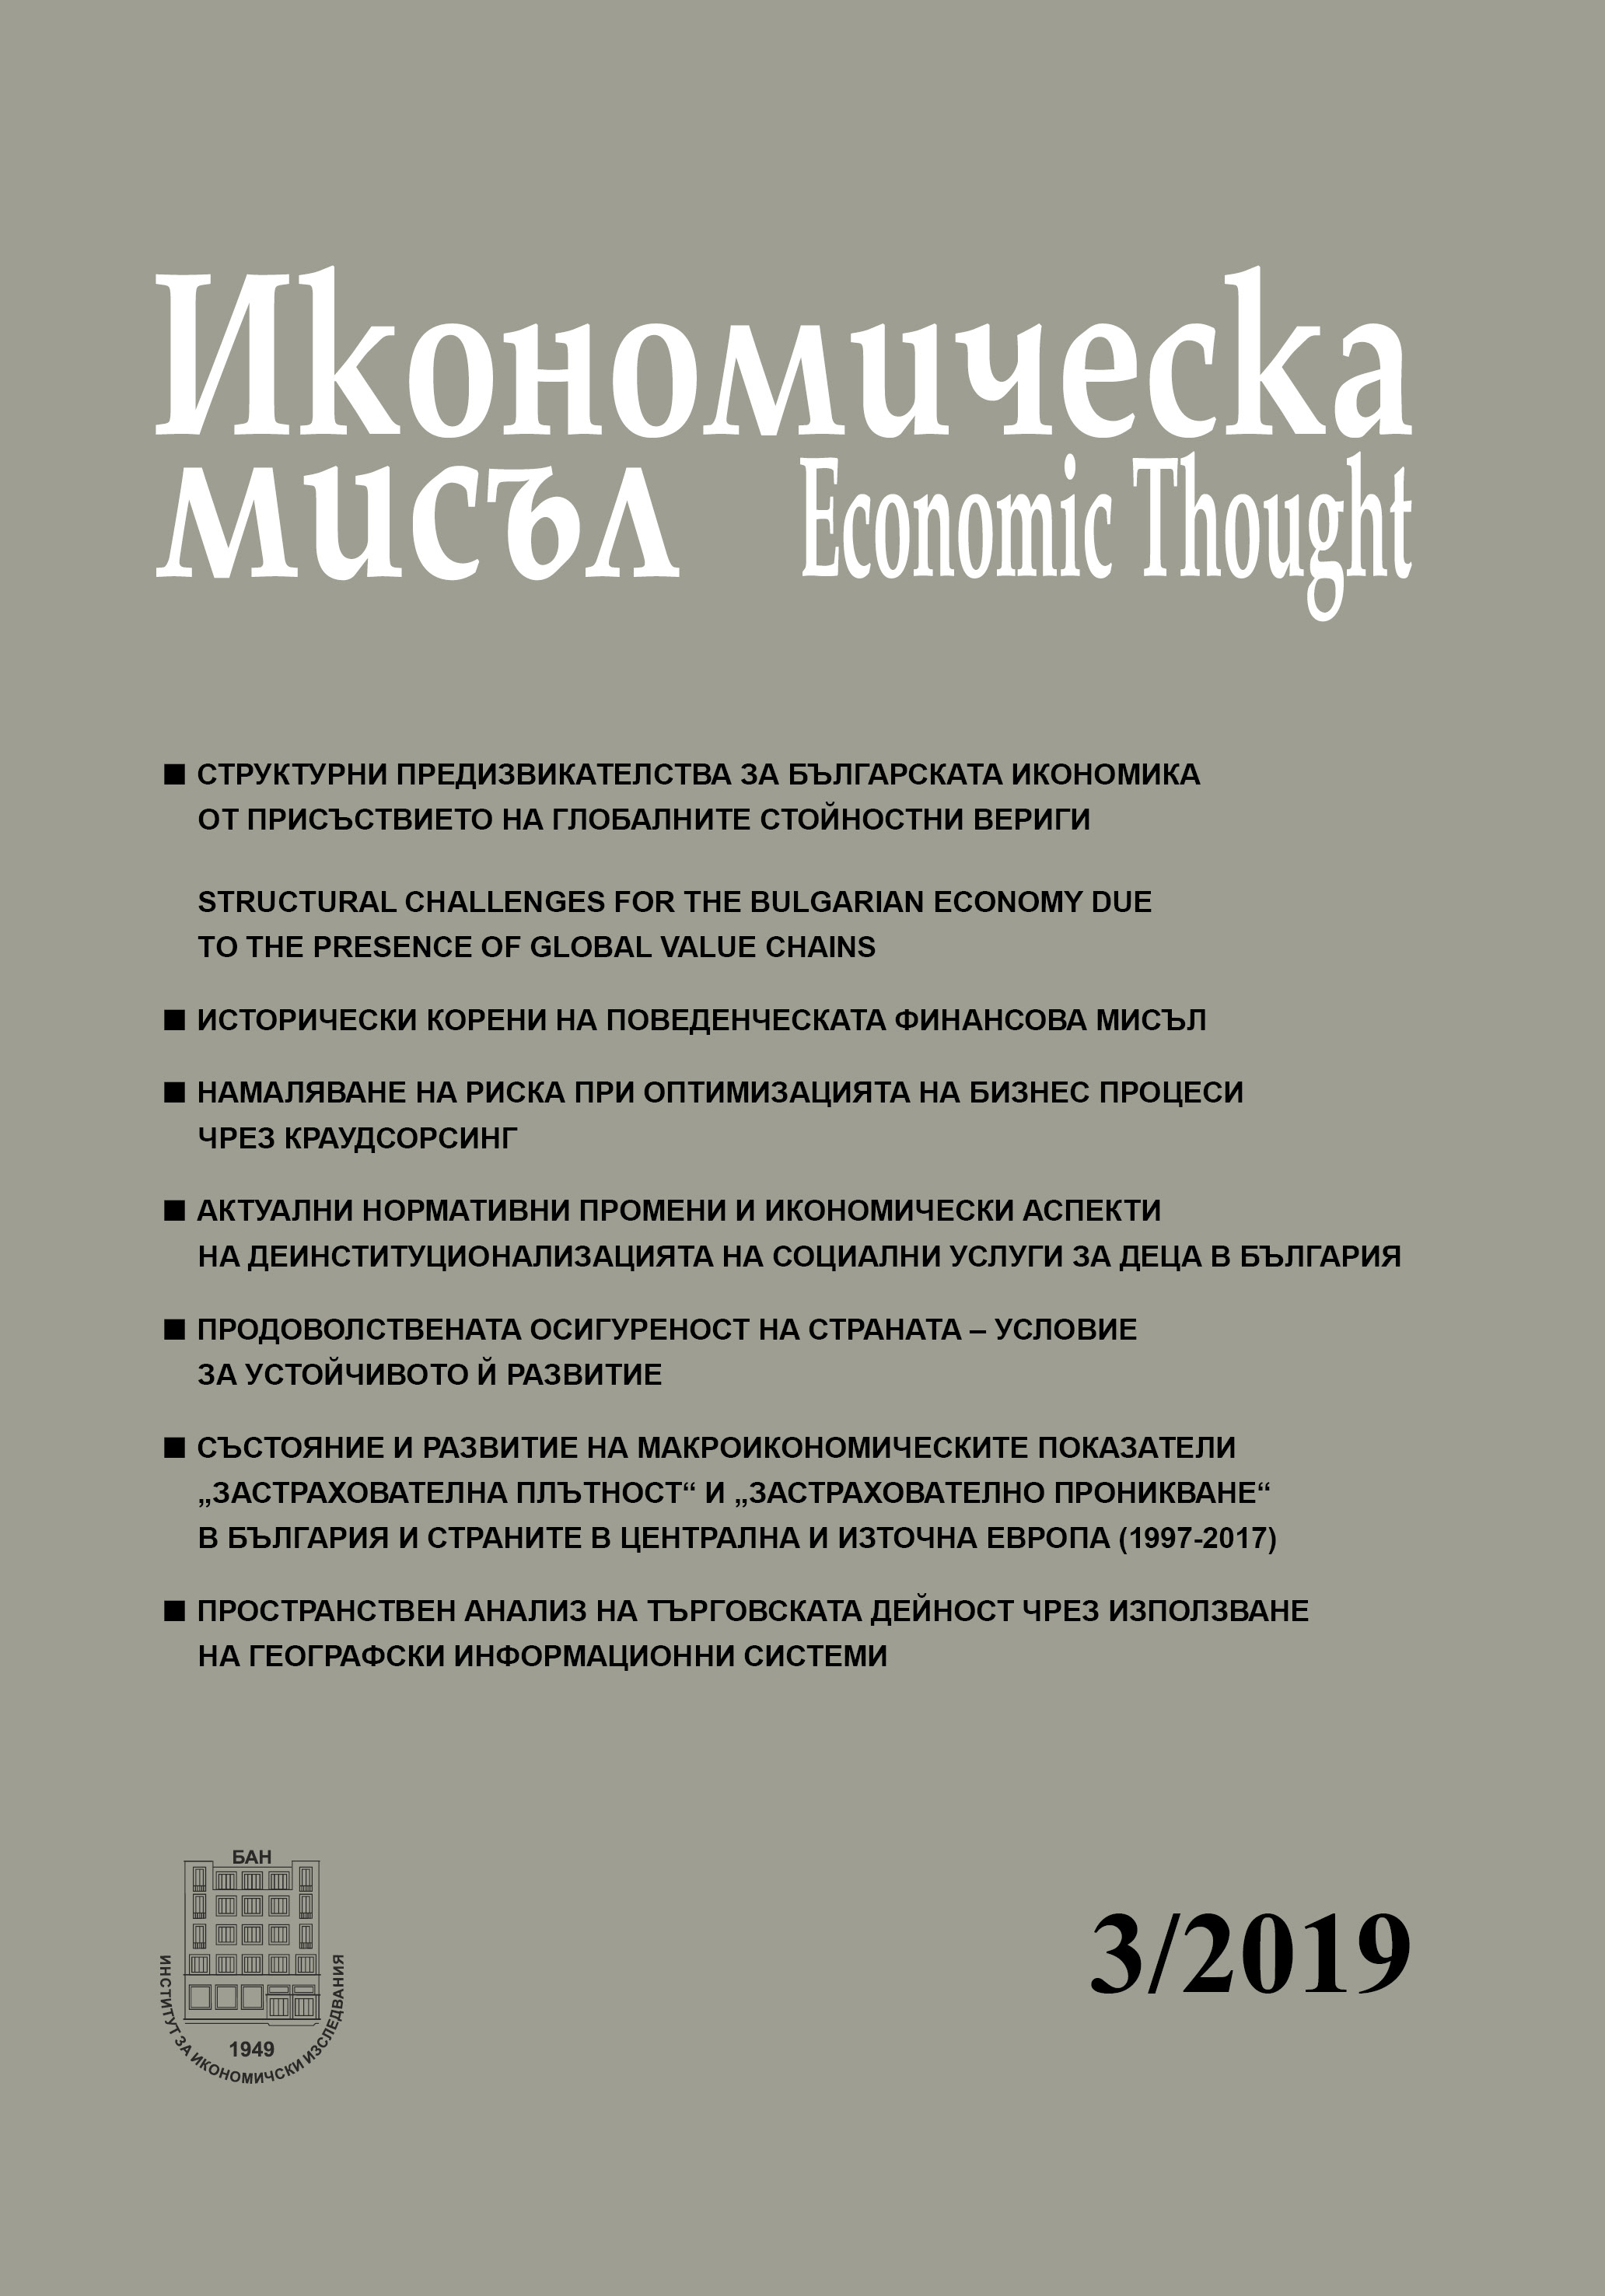 Status and trends in the development of the macroeconomic indicators "insurance density" and "insurance penetration" in Bulgaria and the countries of Central and Eastern Europe (1997-2017) Cover Image